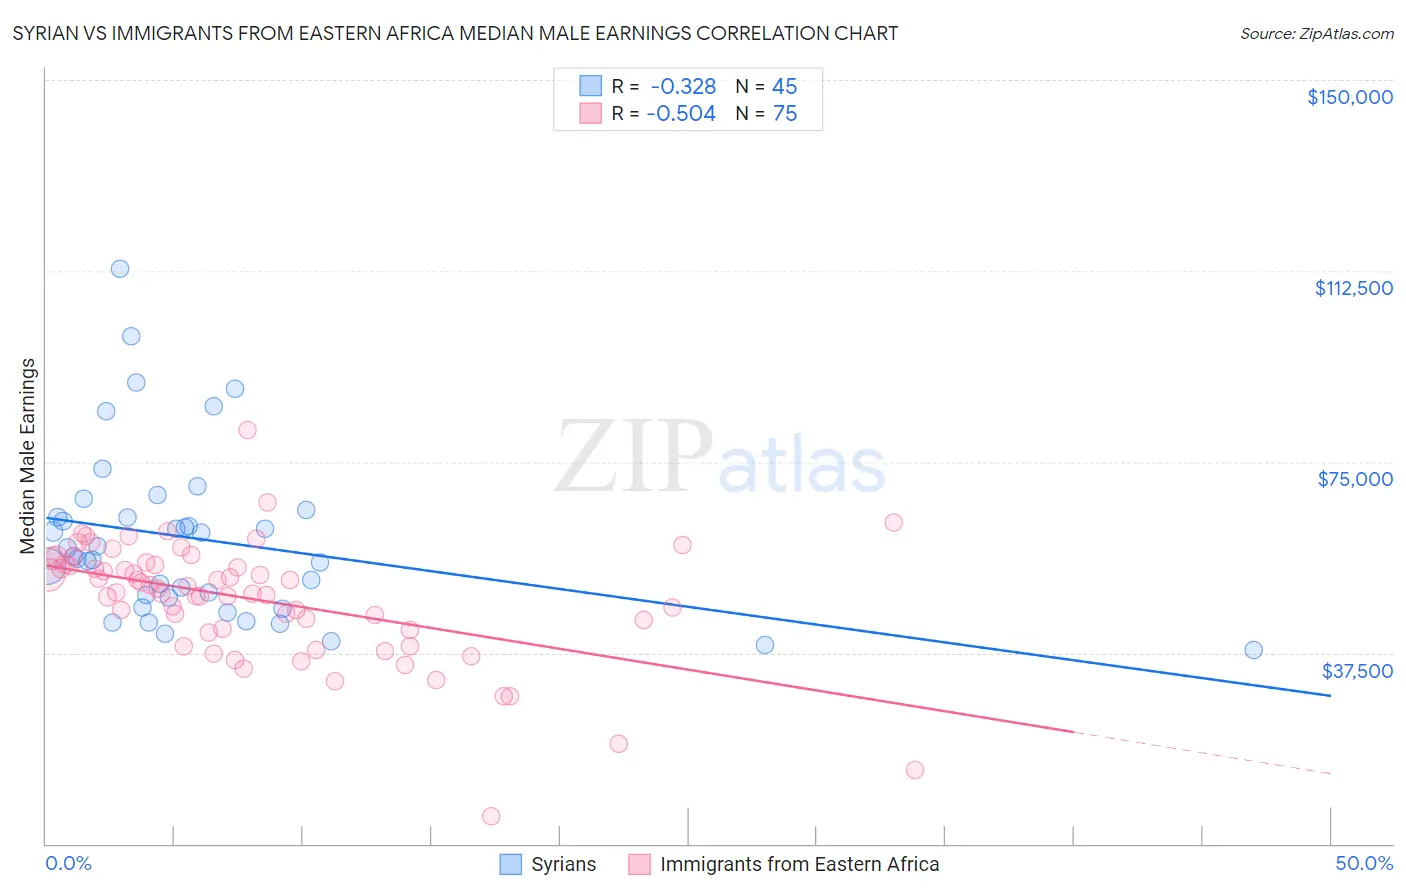 Syrian vs Immigrants from Eastern Africa Median Male Earnings